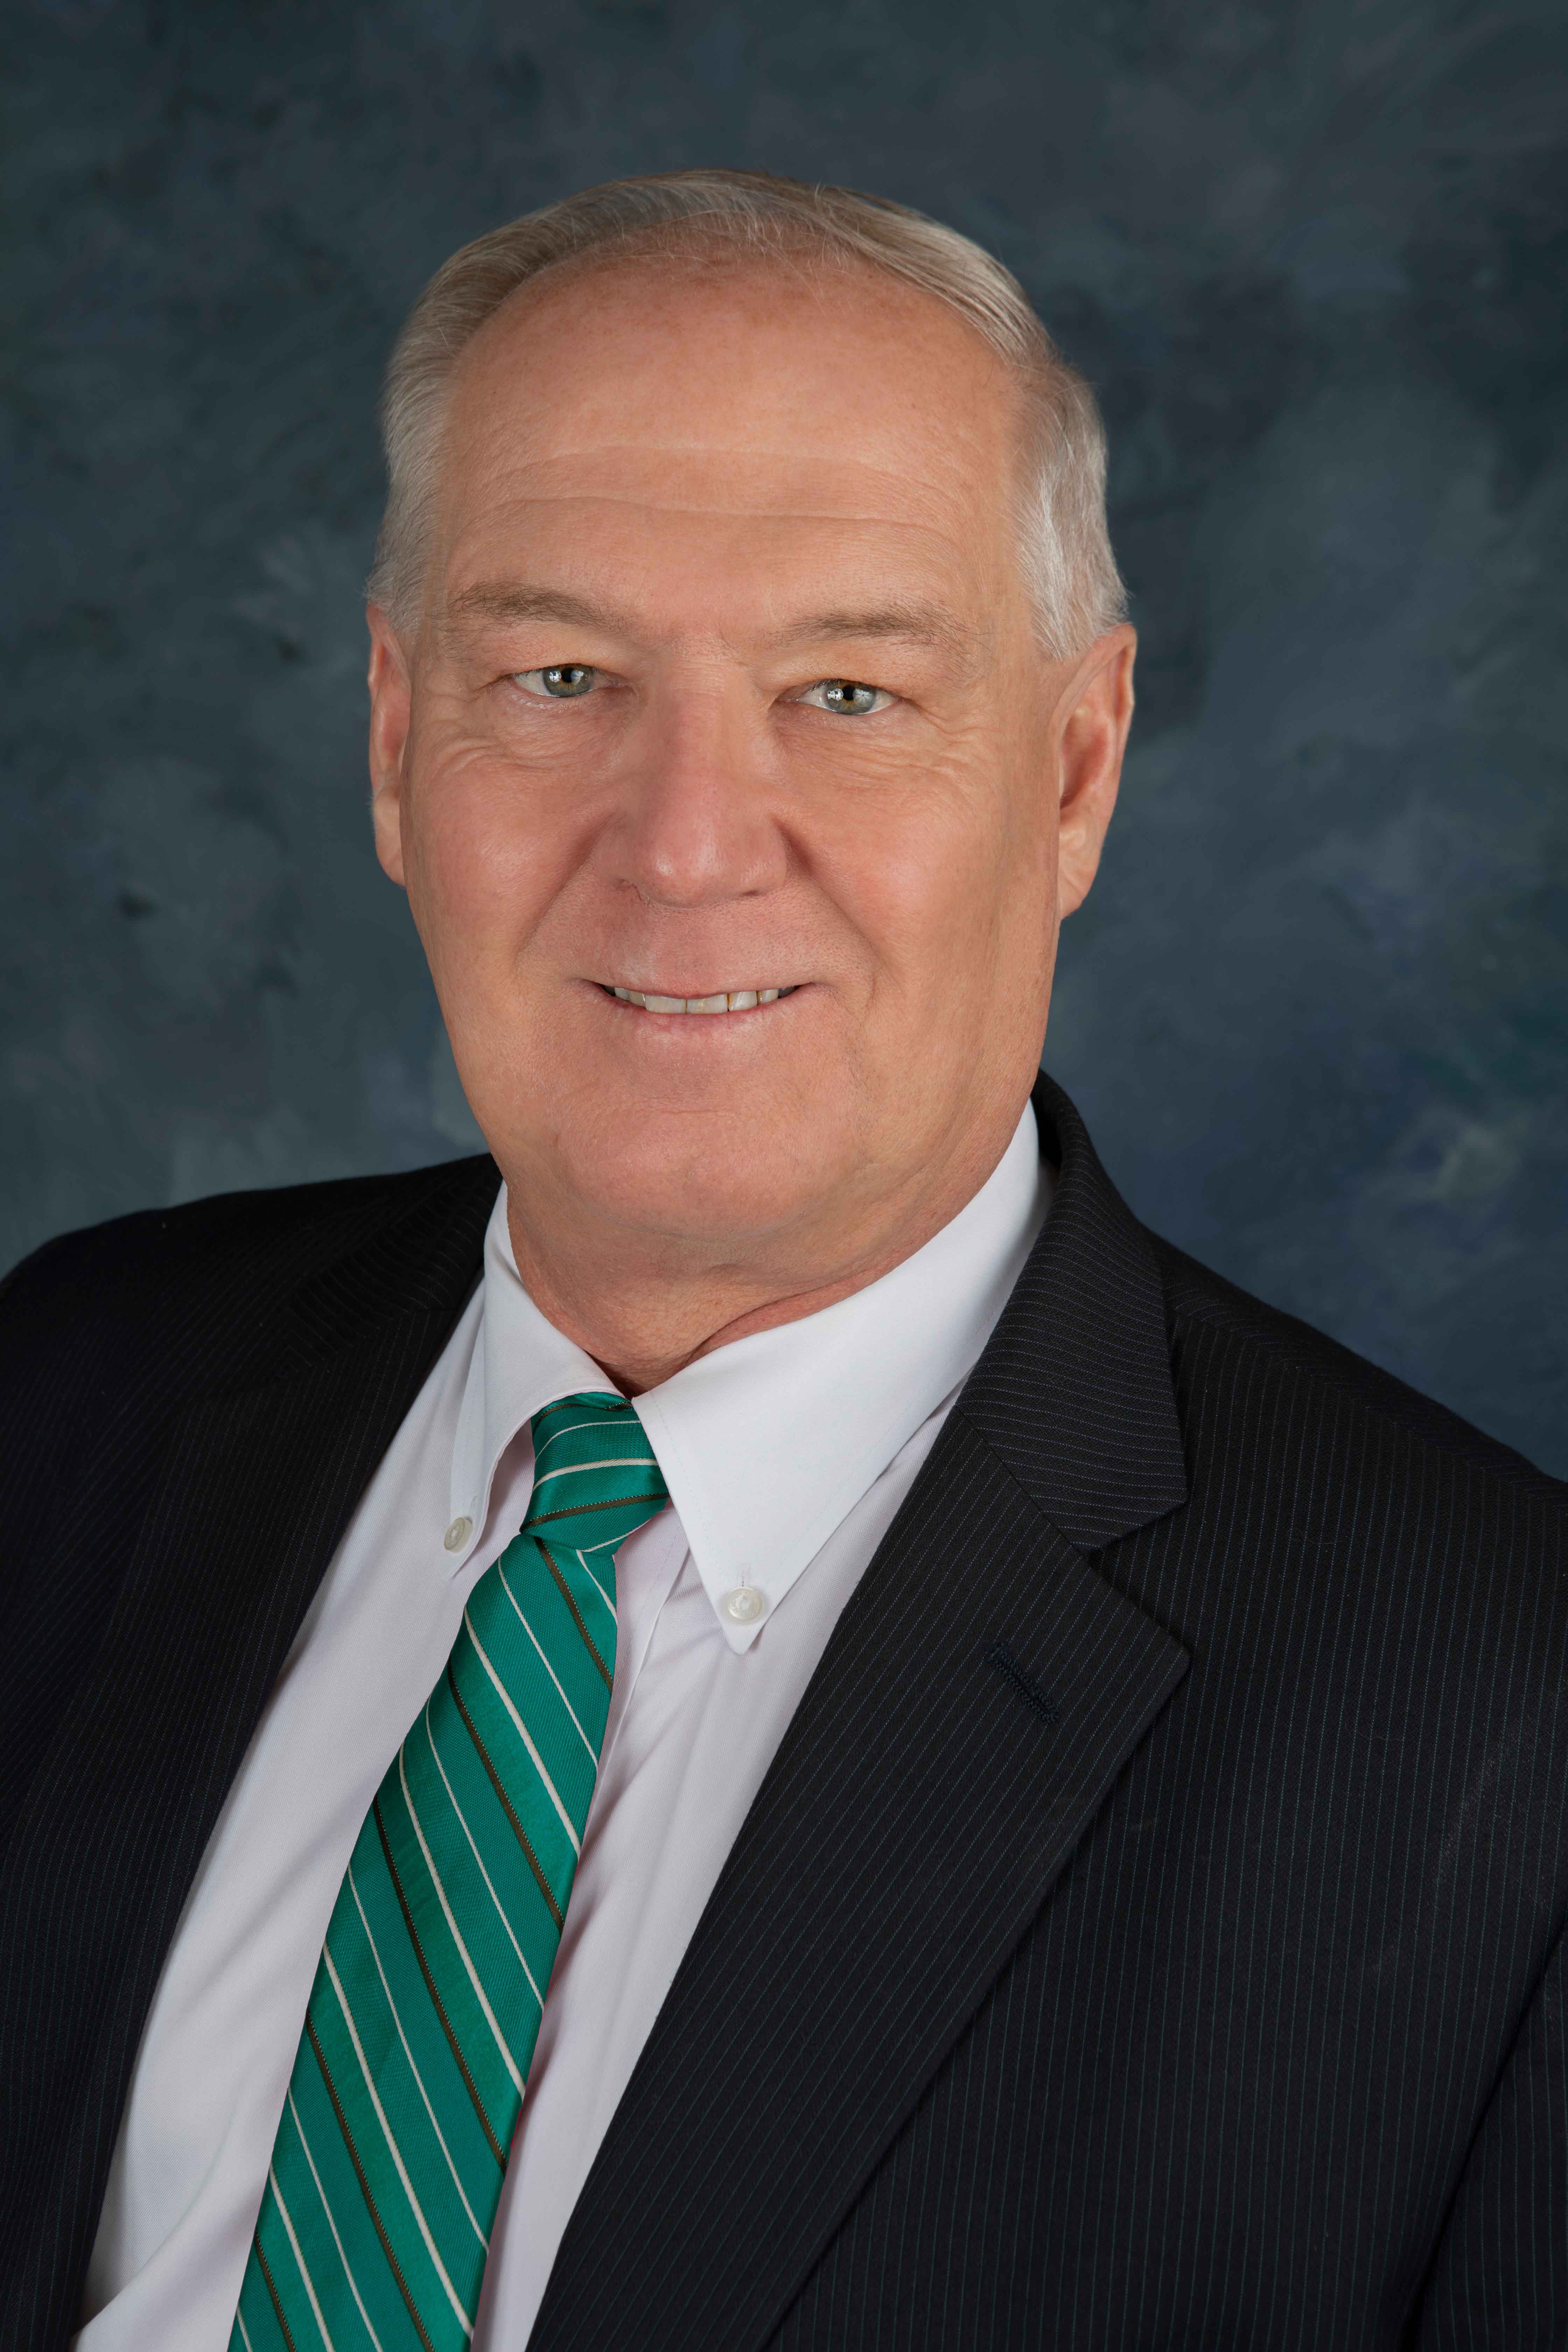 Kevin Fralicks named associate vice president for alumni relations and advancement communications at UNT